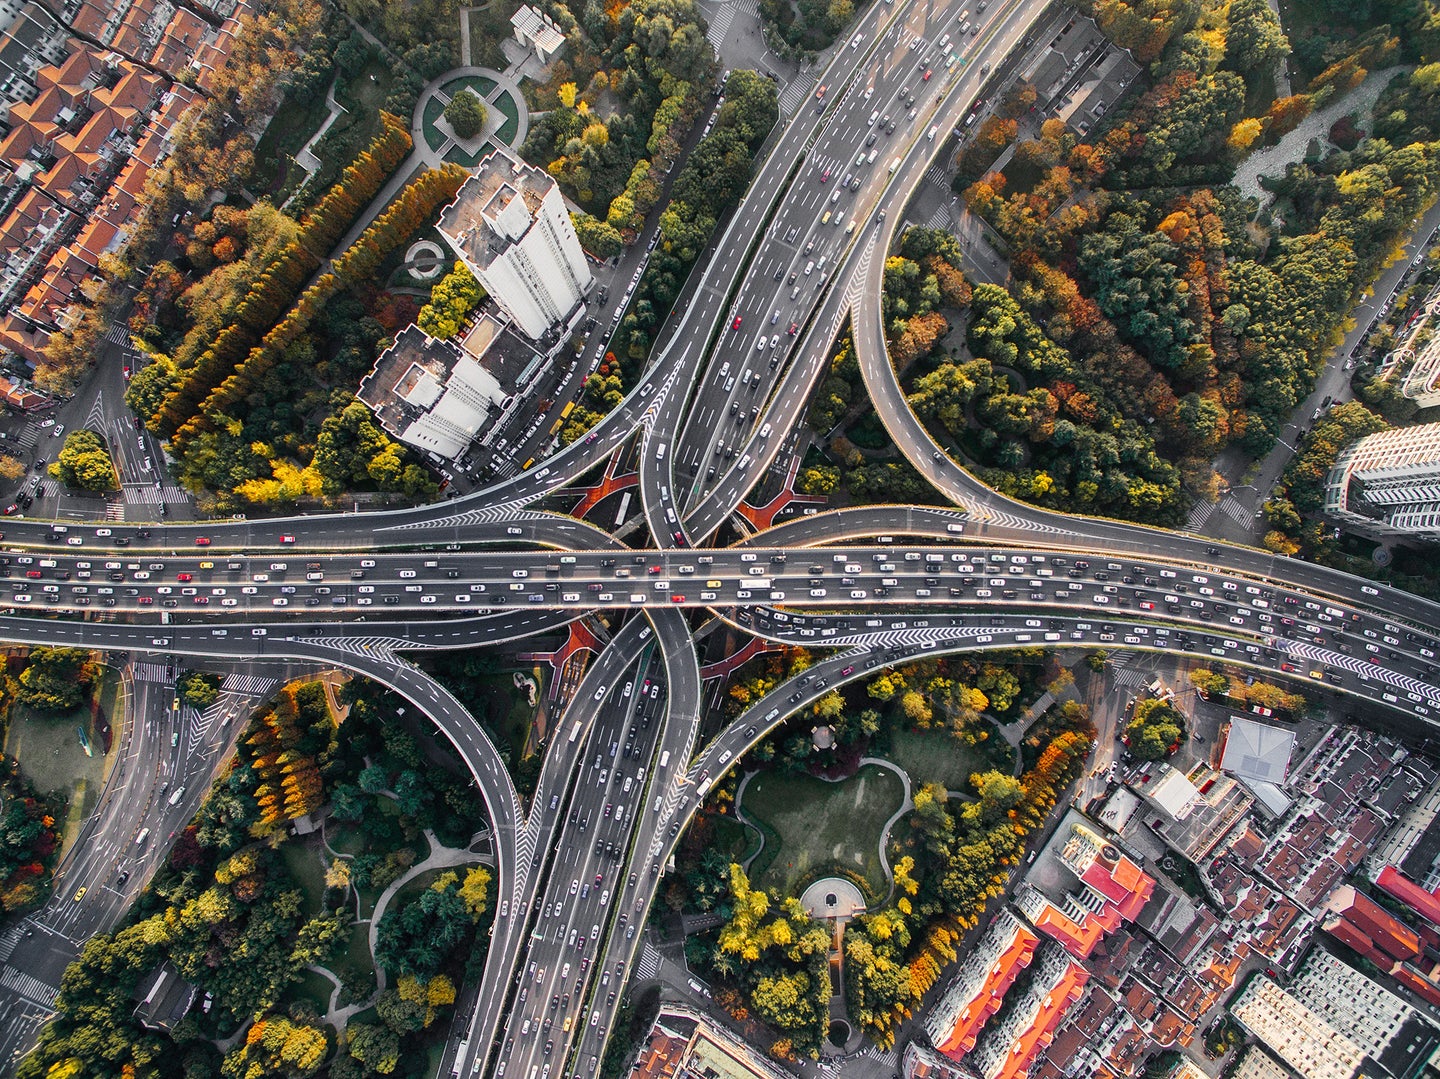 birds-eye view of highway with cars, buildings, and trees